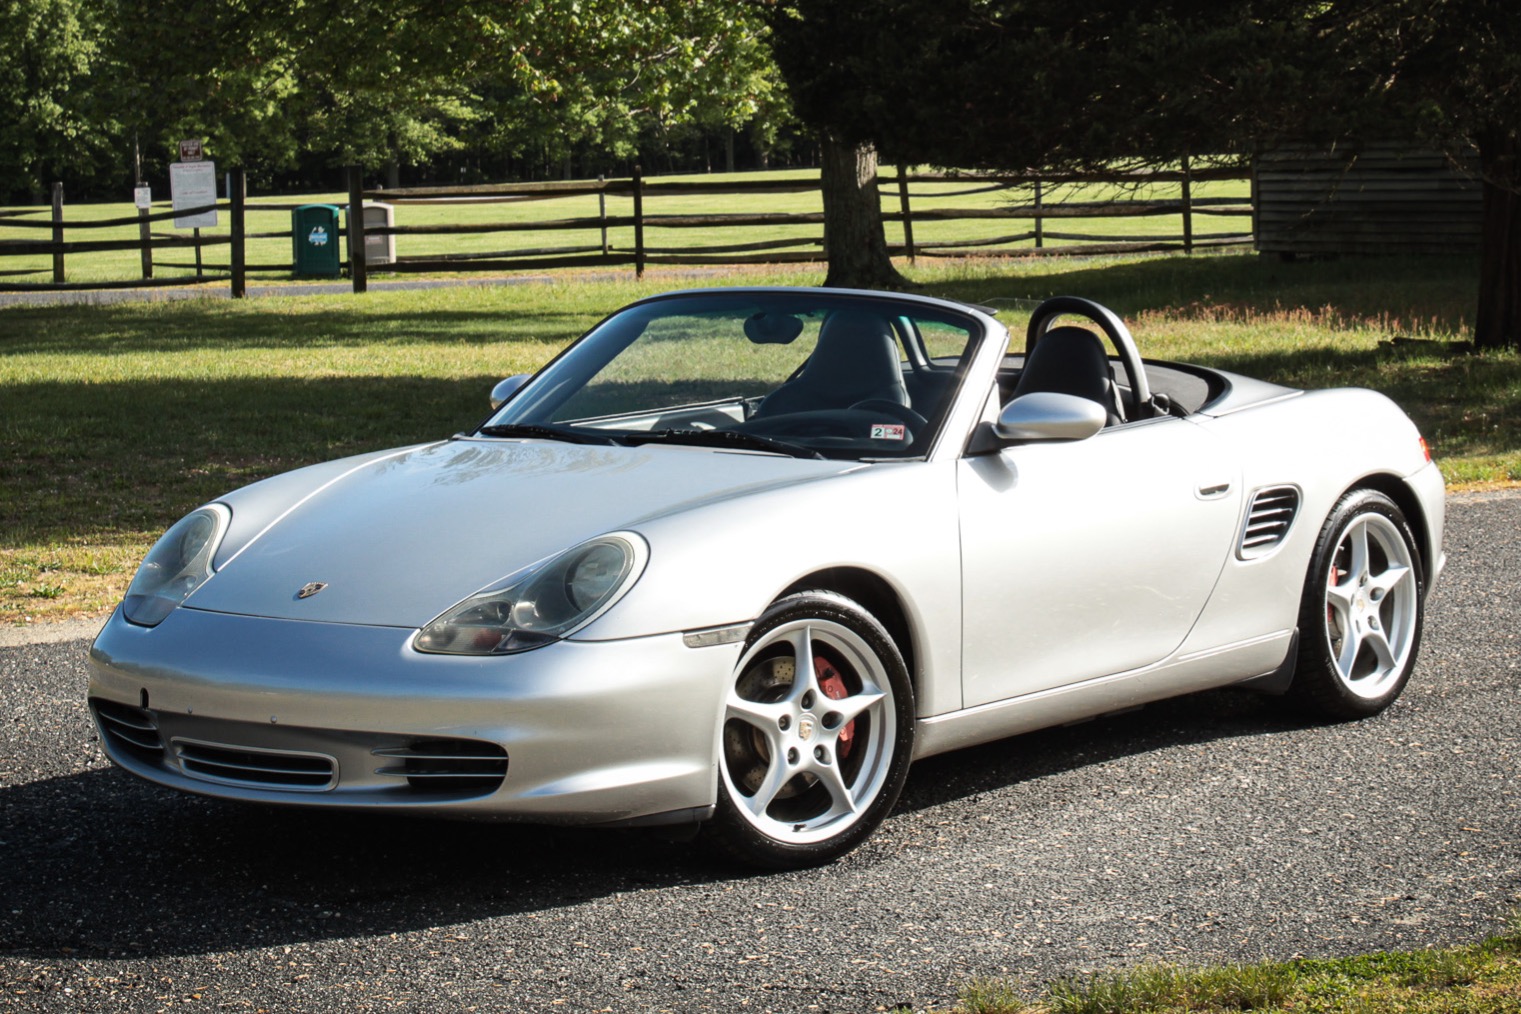 Used 2003 Porsche Boxster S 6-Speed Review